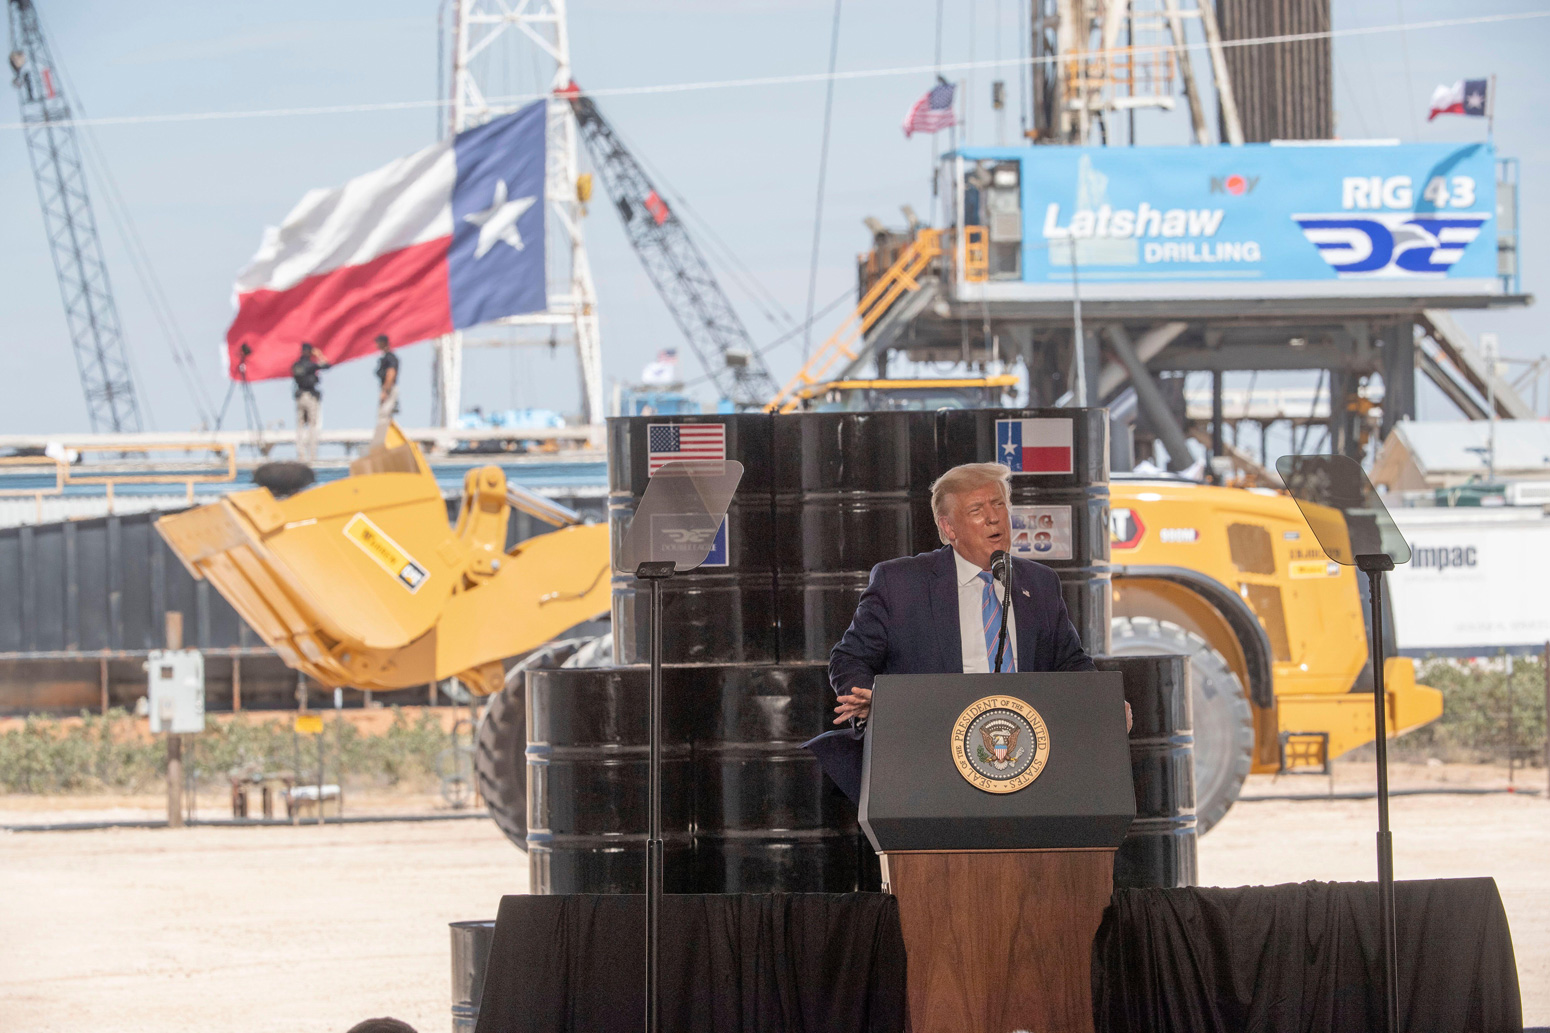 Donald Trump talks at Latshaw 9 drilling rig on the Double Eagle well site, Texas.